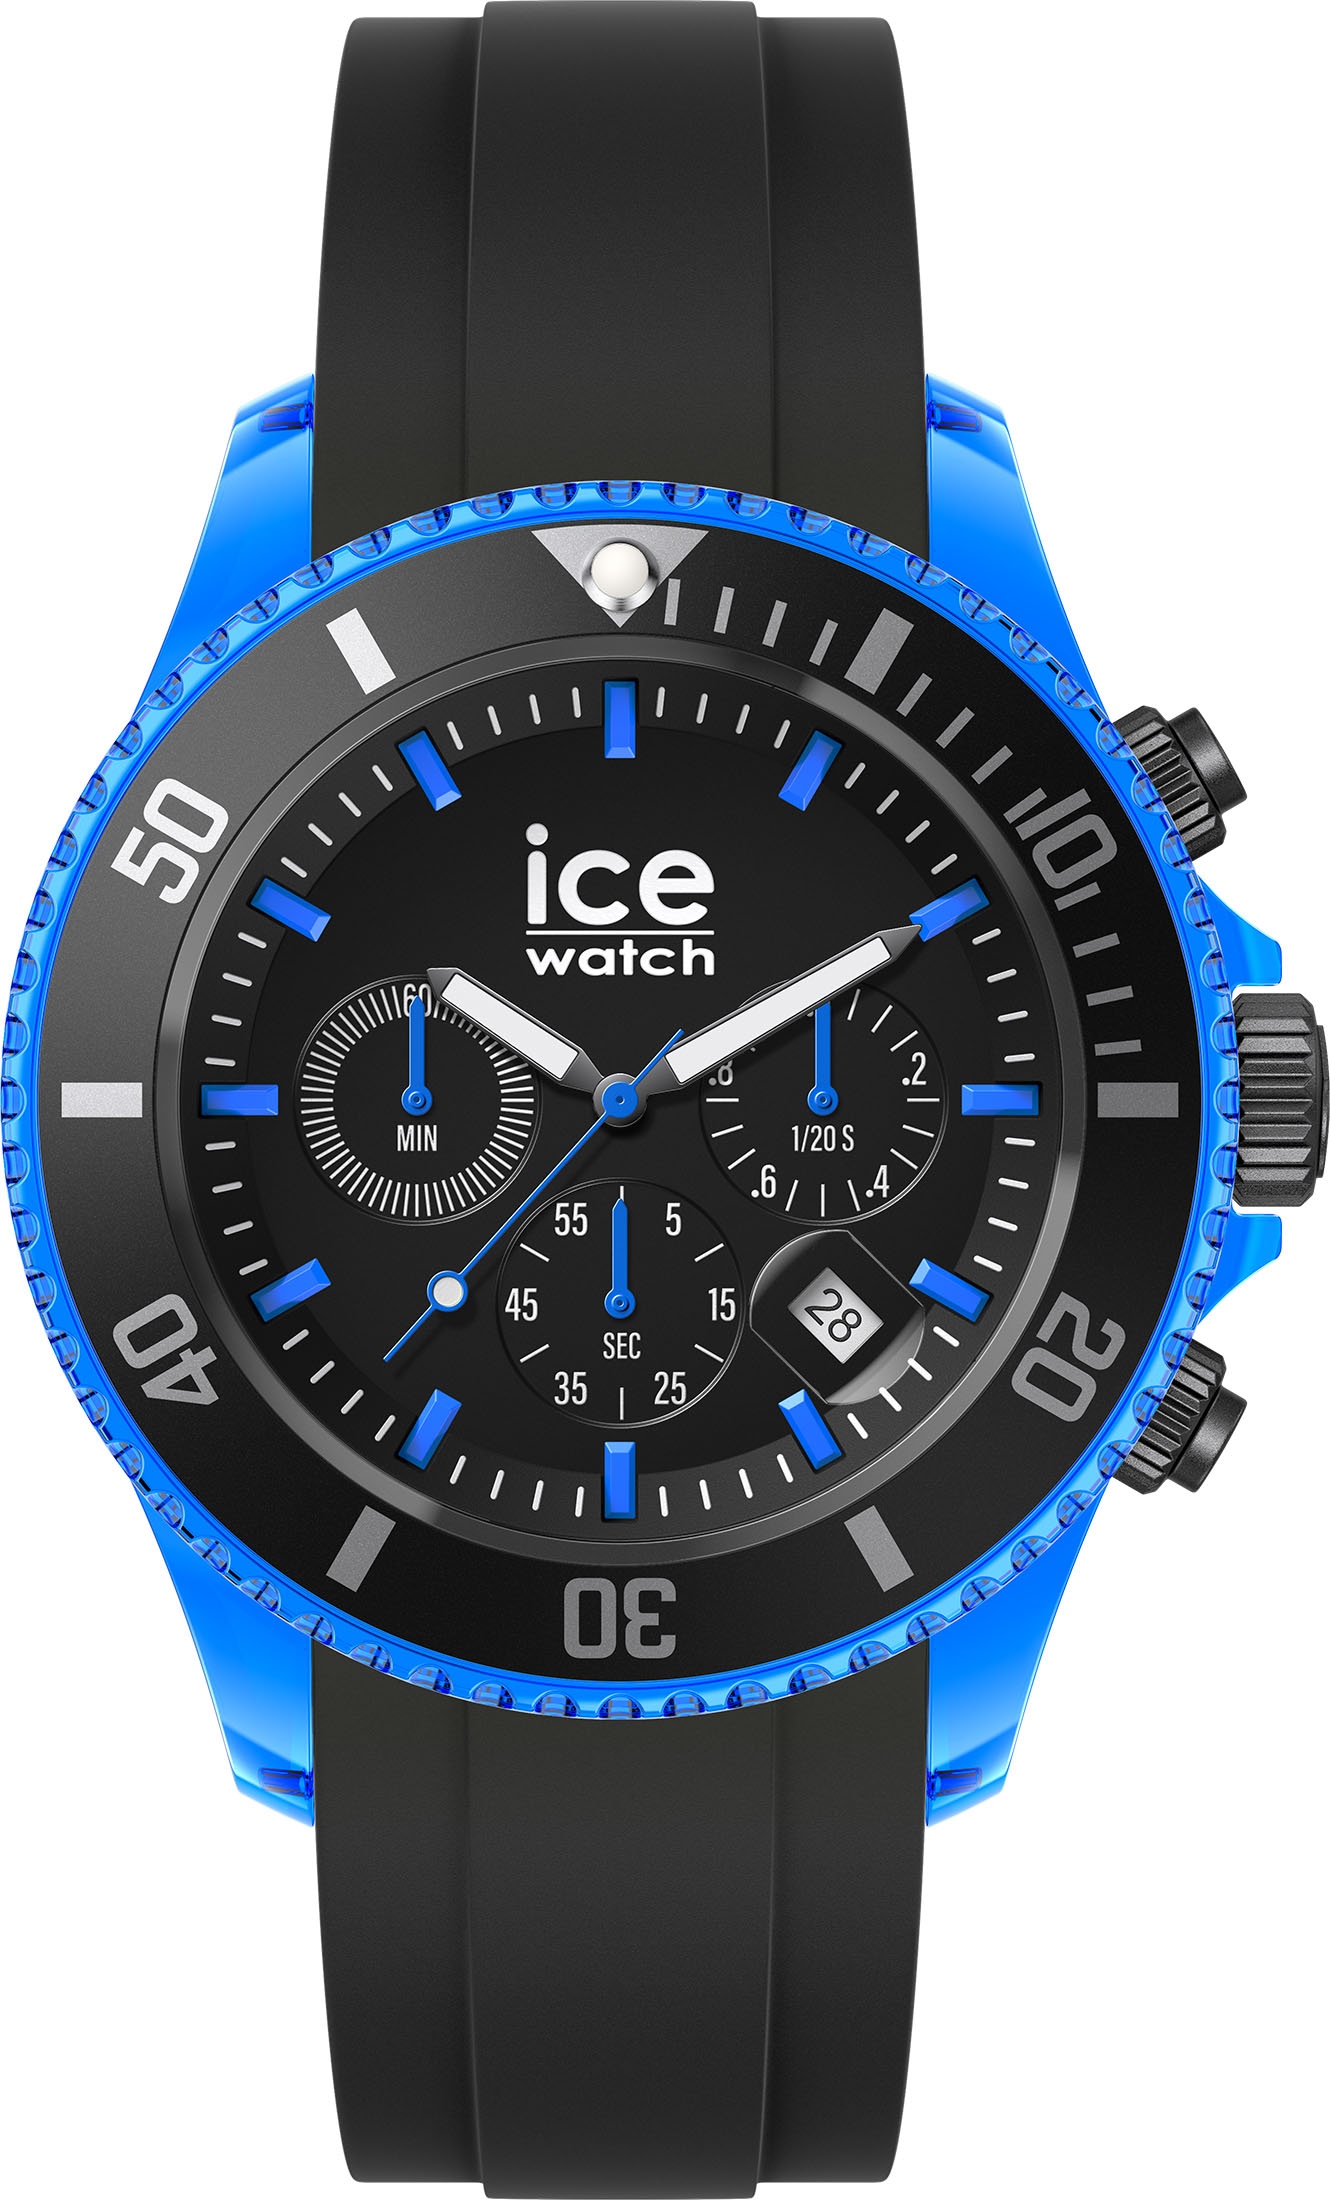 ice-watch Chronograph »ICE chrono - Black blue - Extra large - CH, 019844«  online shoppen bei OTTO